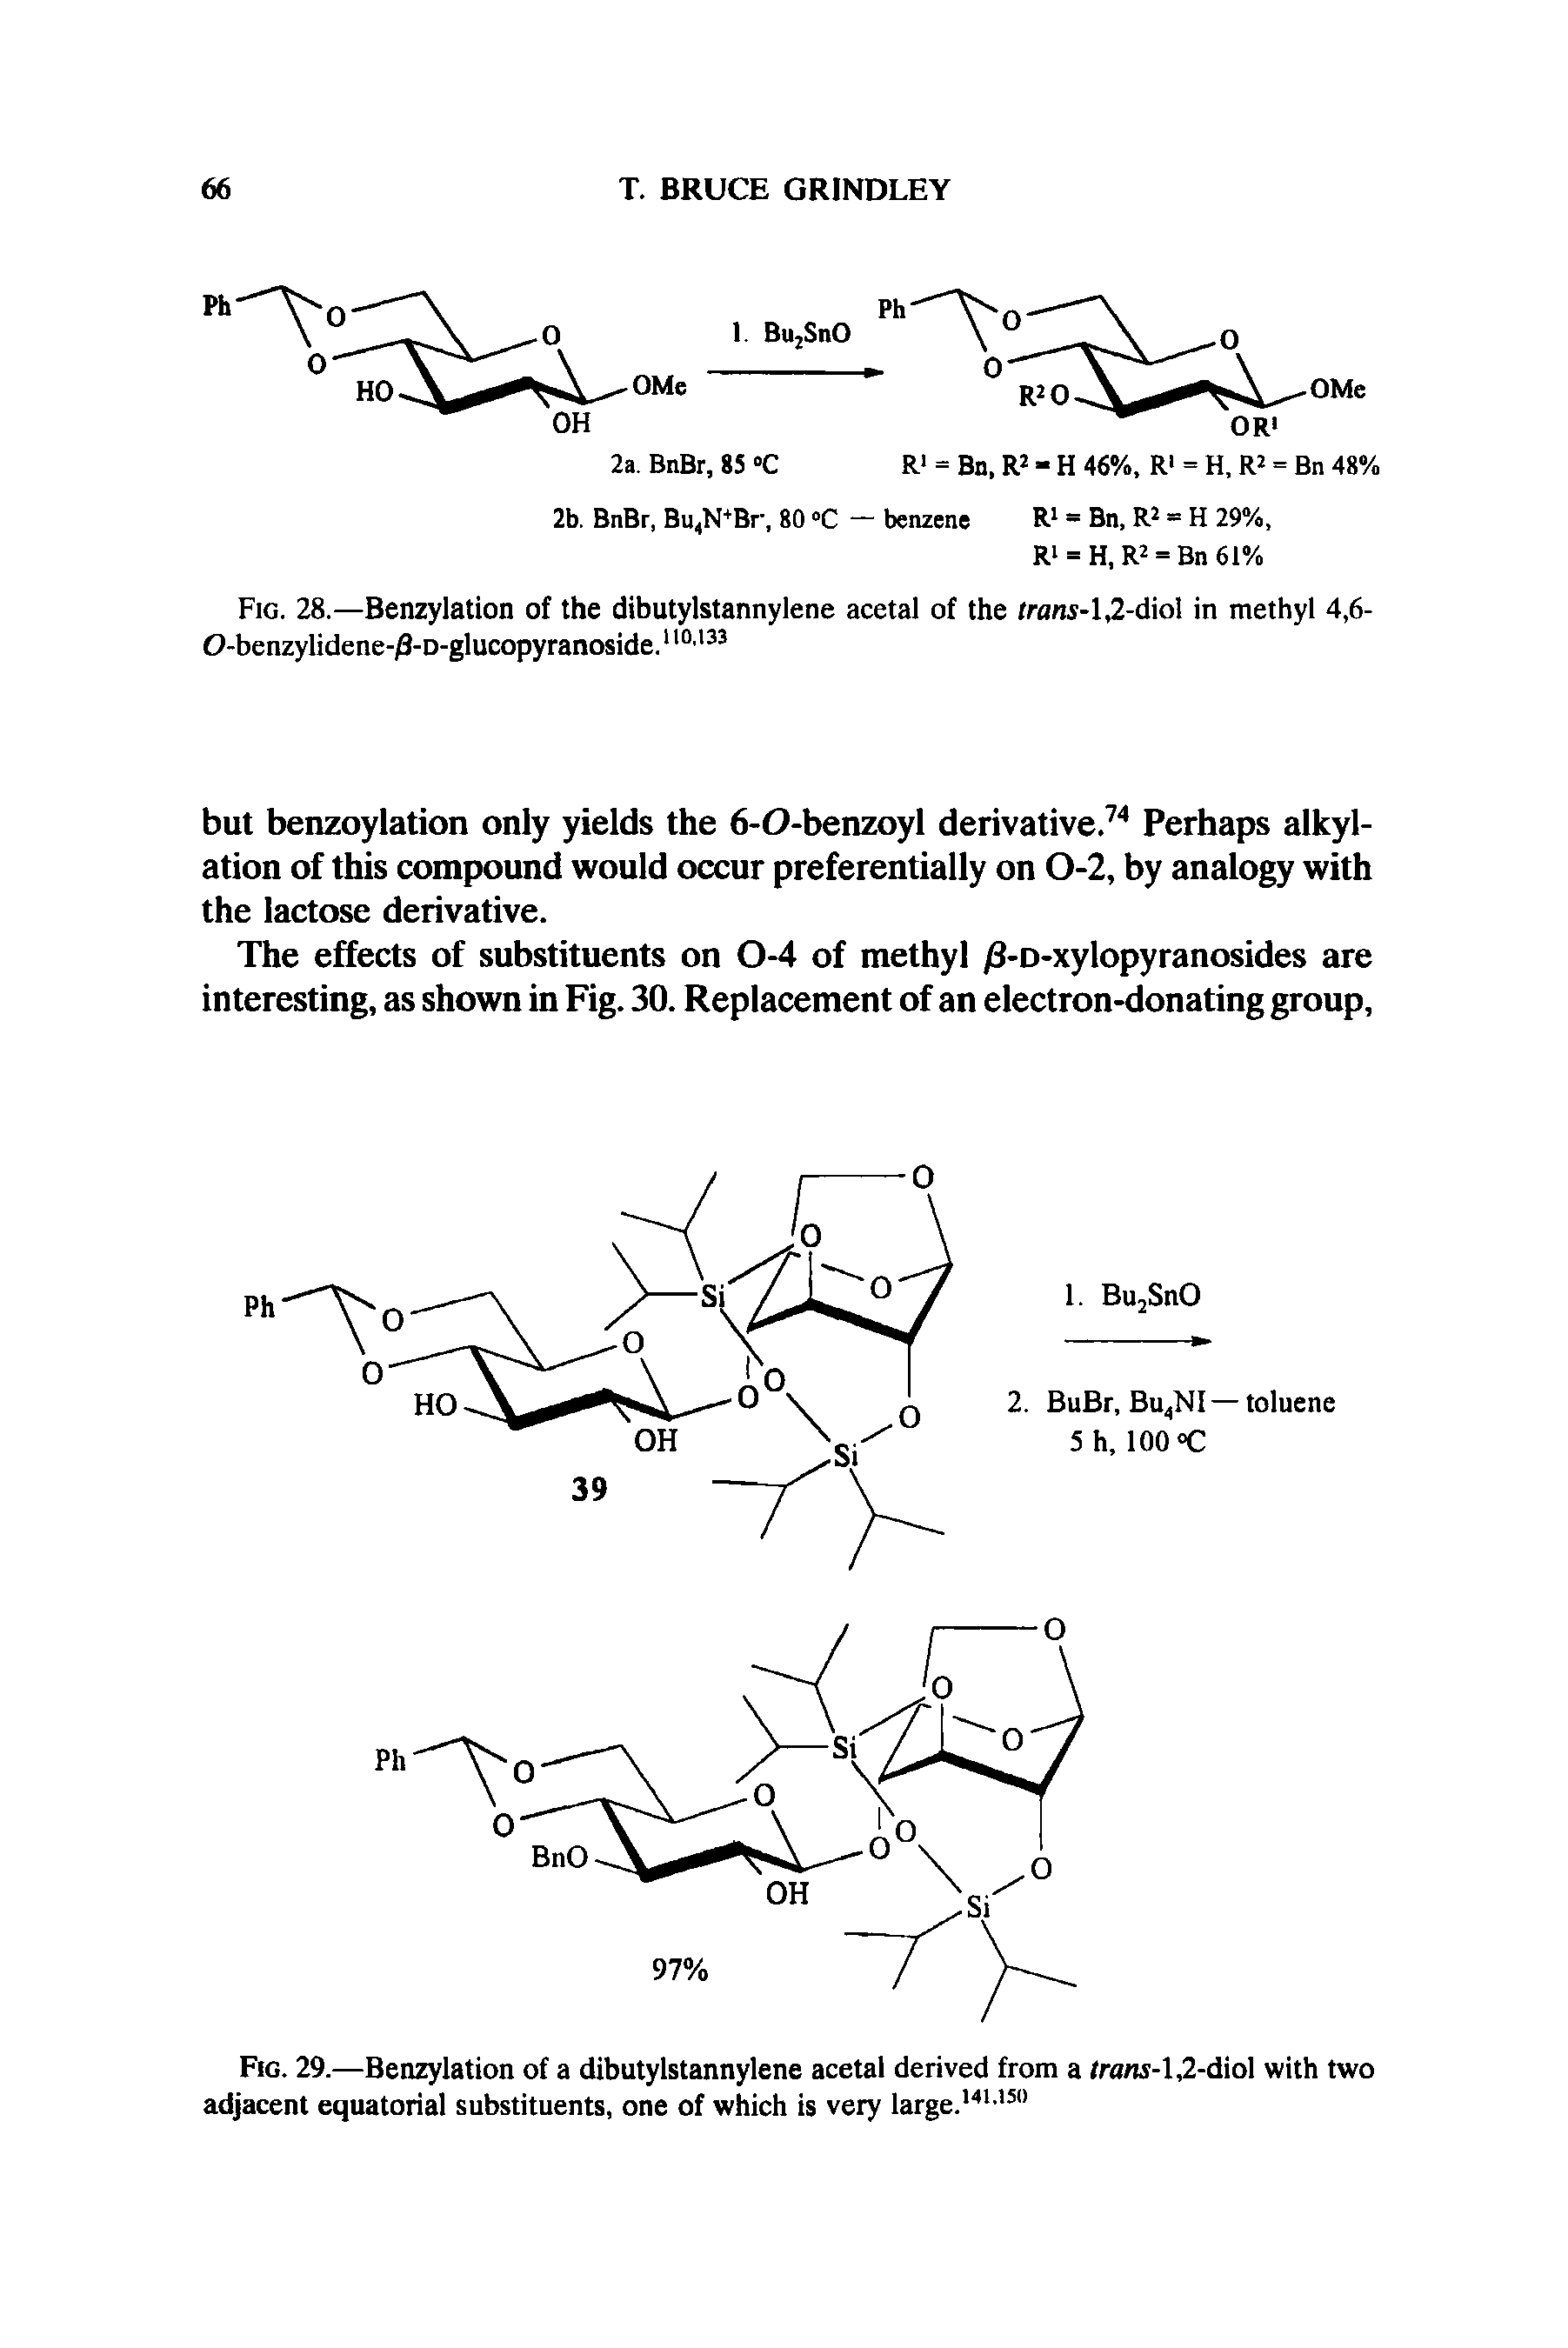 Fig. 29.—Benzylation of a dibutylstannylene acetal derived from a lra/w-l,2-diol with two adjacent equatorial substituents, one of which is very large.141150...